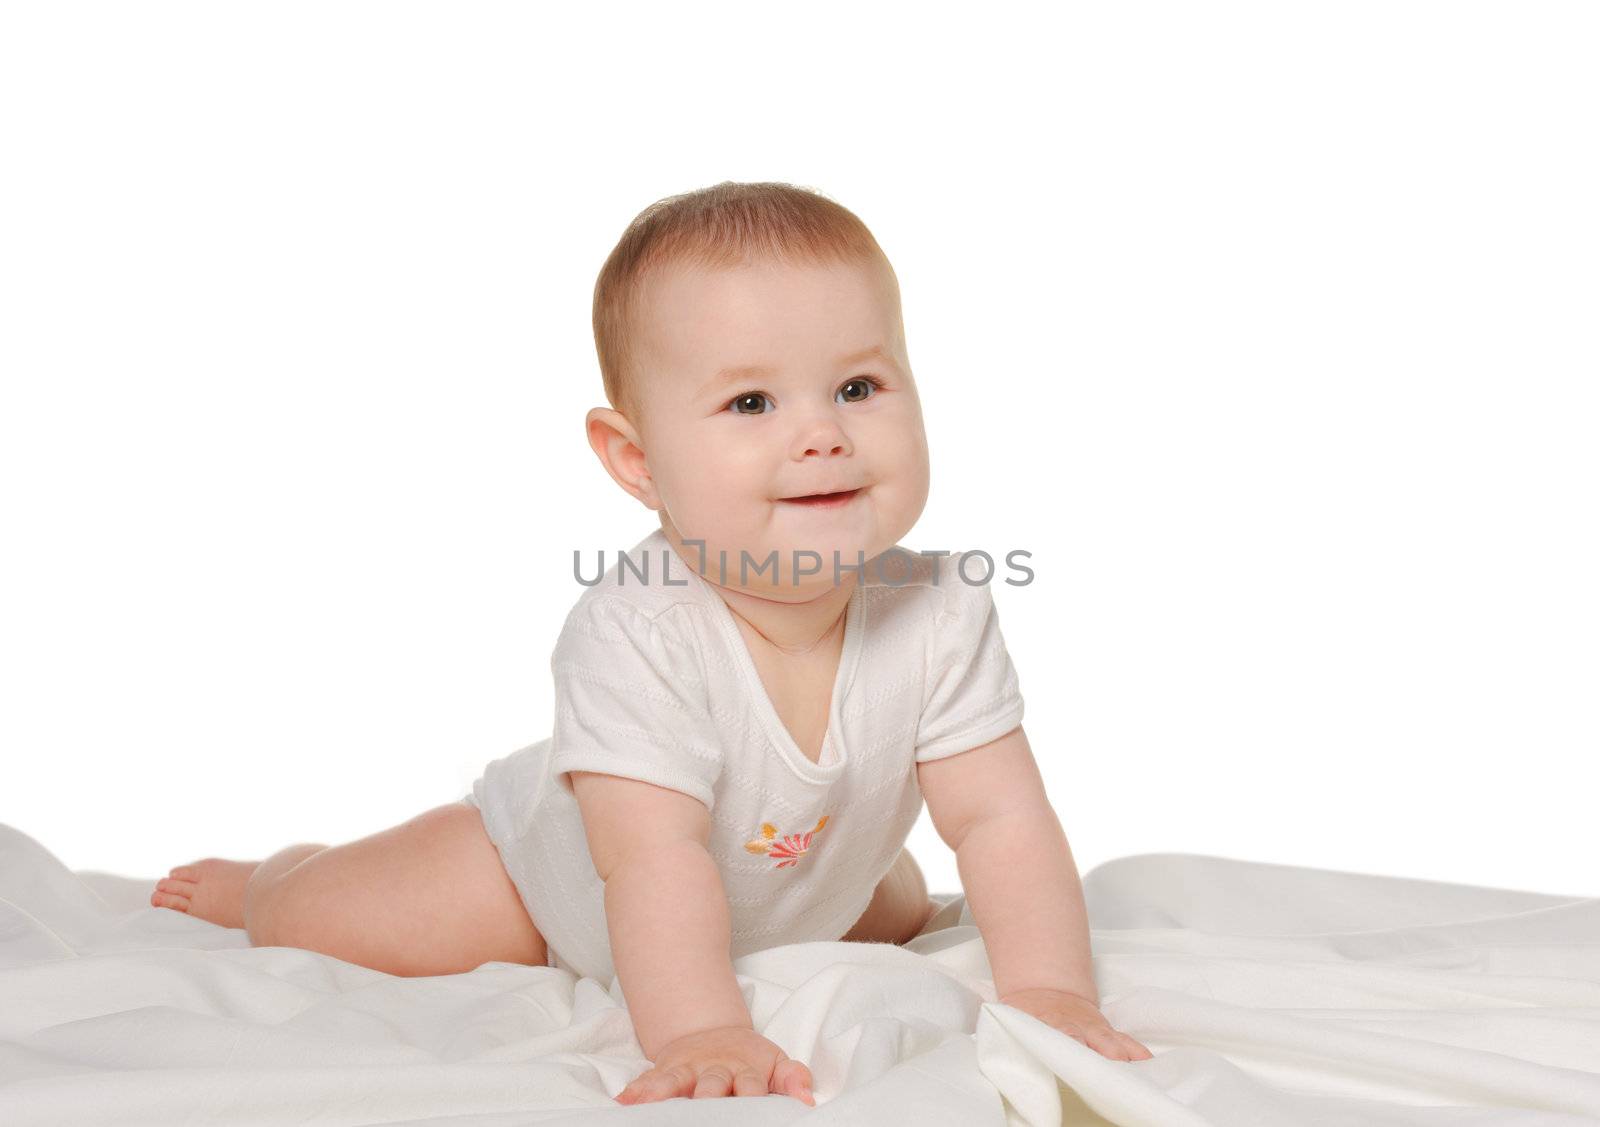 The baby on a bedsheet by galdzer